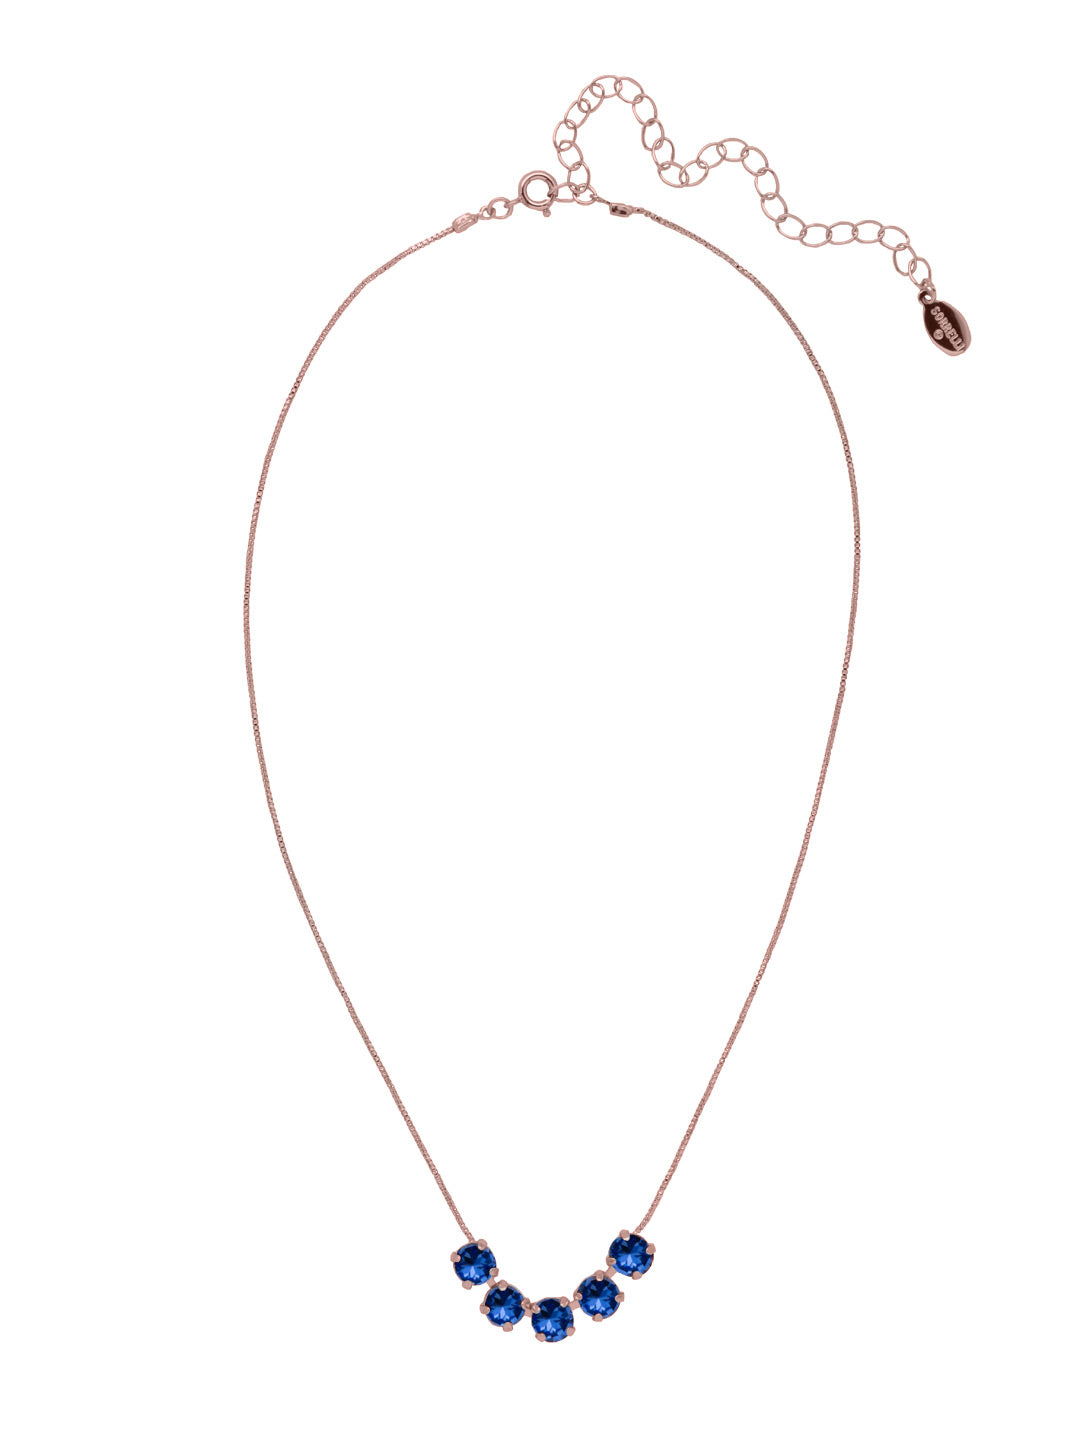 Shaughna Tennis Necklace - NFC84RGSAP - <p>The Shaughna Tennis Necklace features five crystals on a delicate adjustable chain. From Sorrelli's Sapphire collection in our Rose Gold-tone finish.</p>